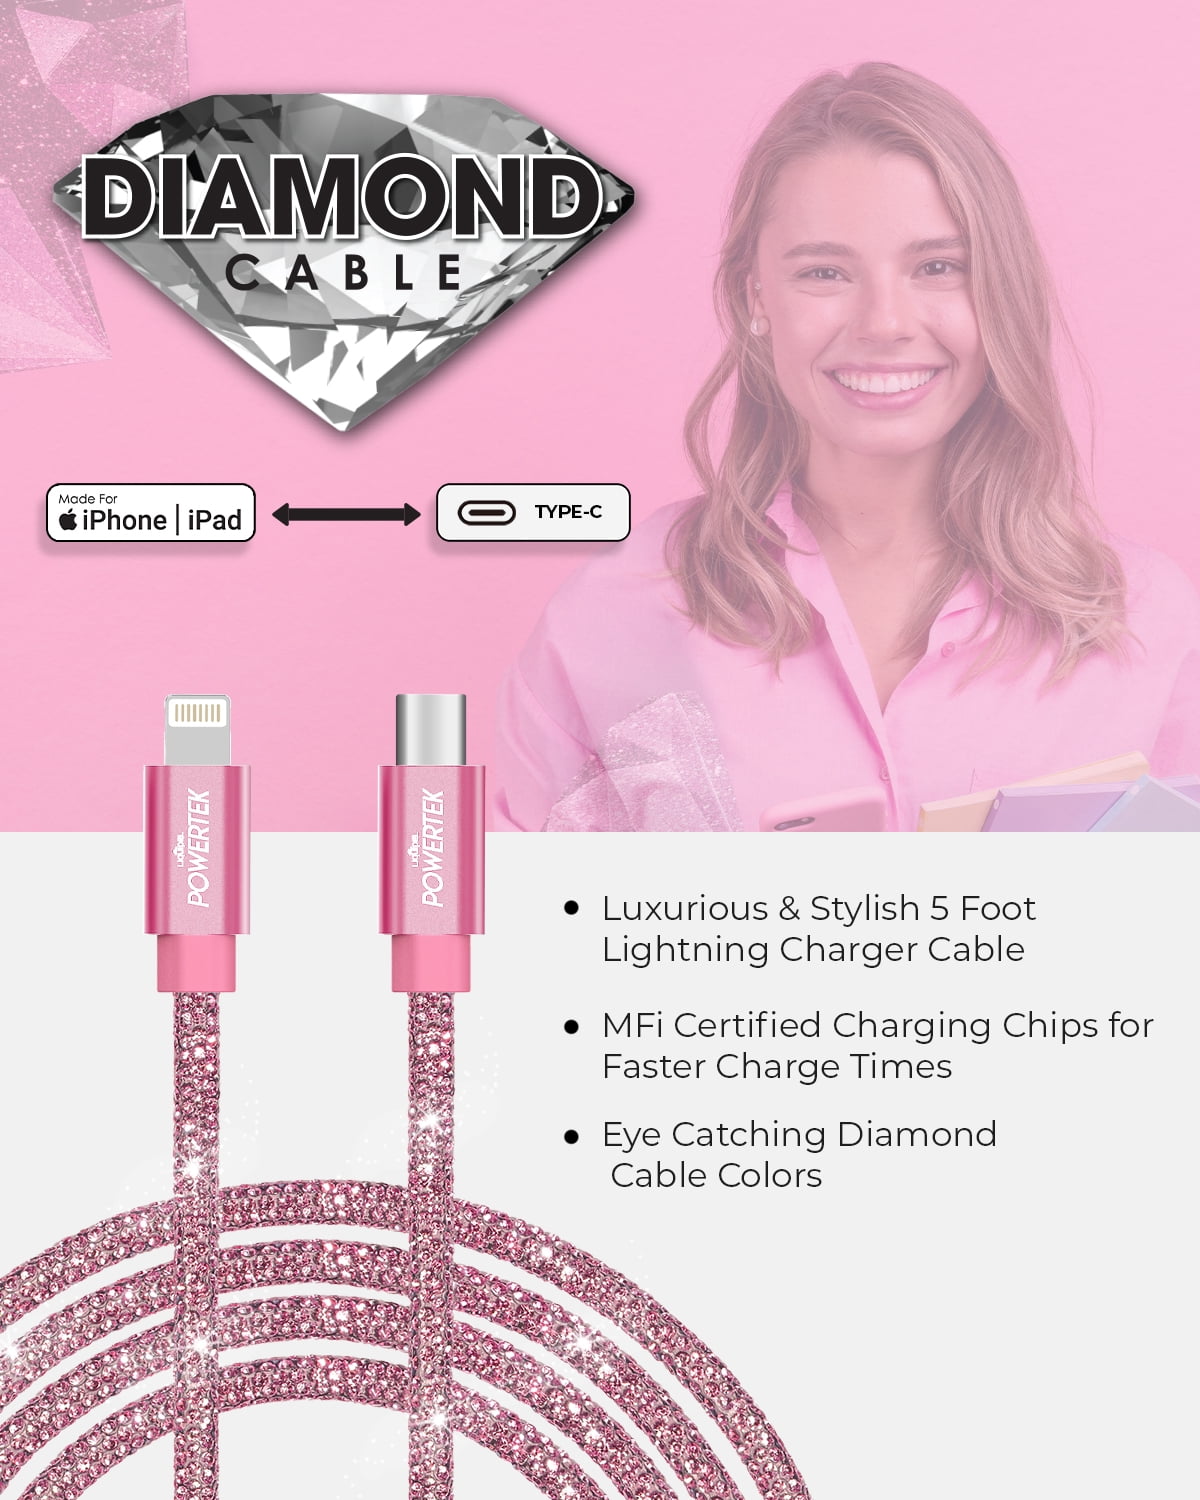 Eco Charge USB-C Cable (MFi) : Rose/Pink – Tech Candy